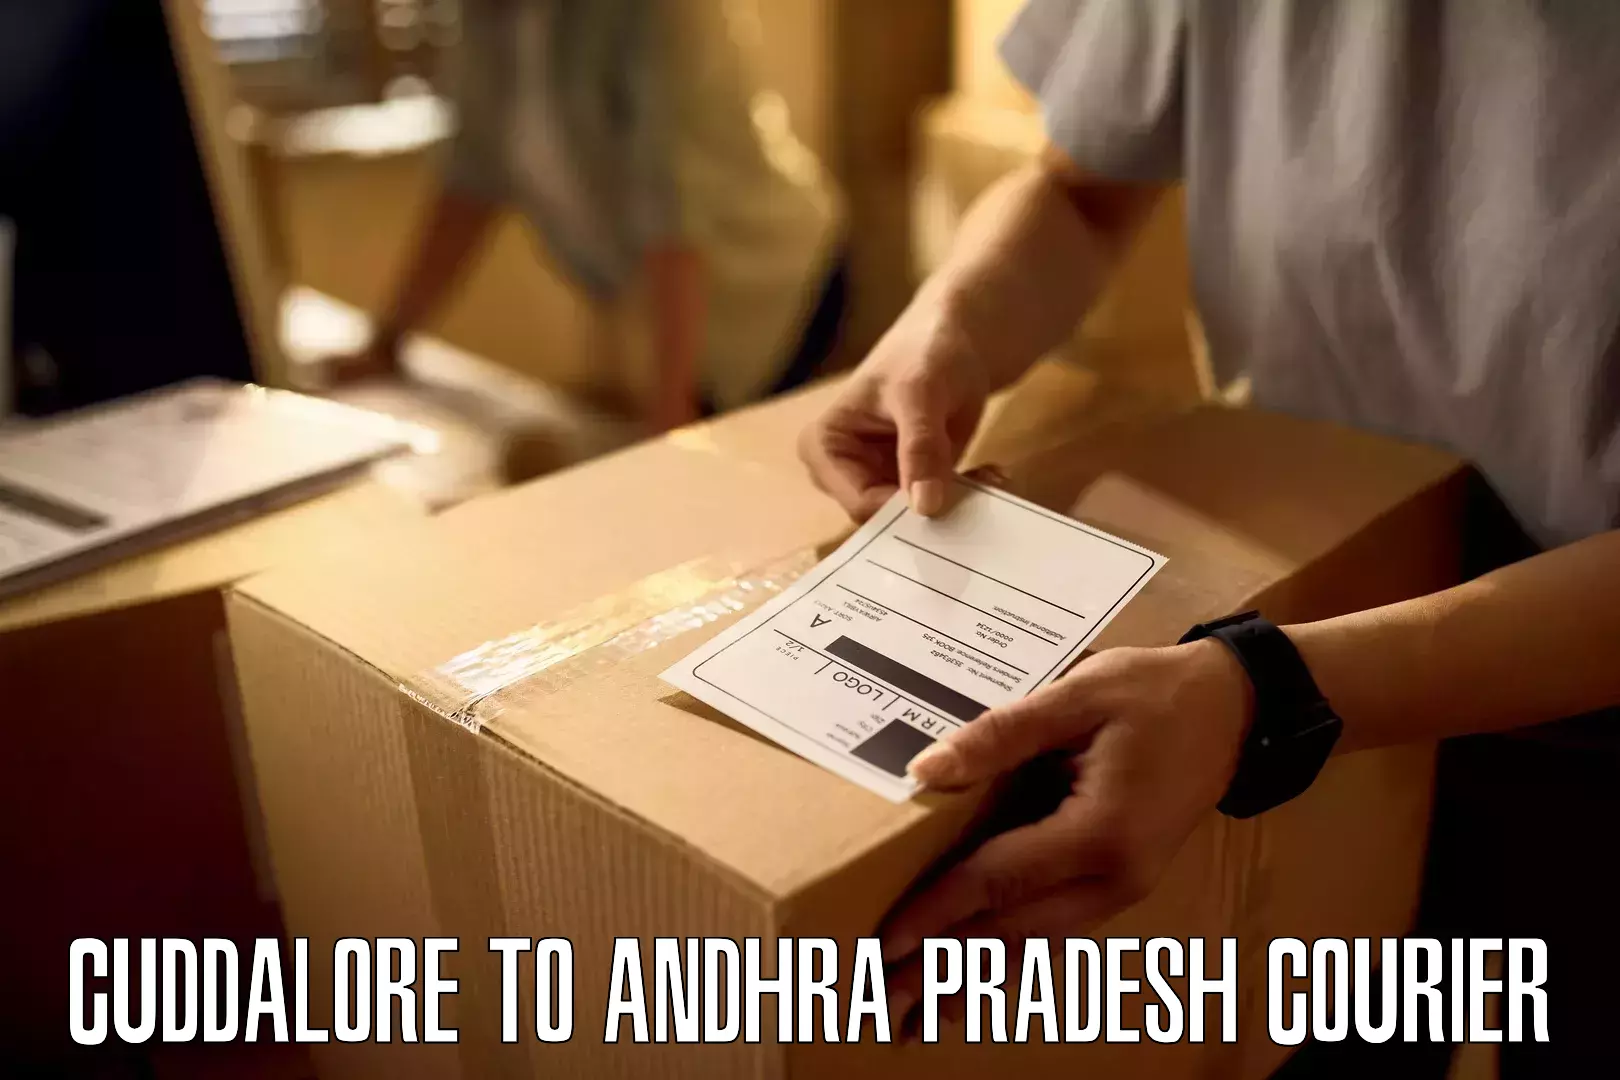 On-call courier service Cuddalore to Kudair